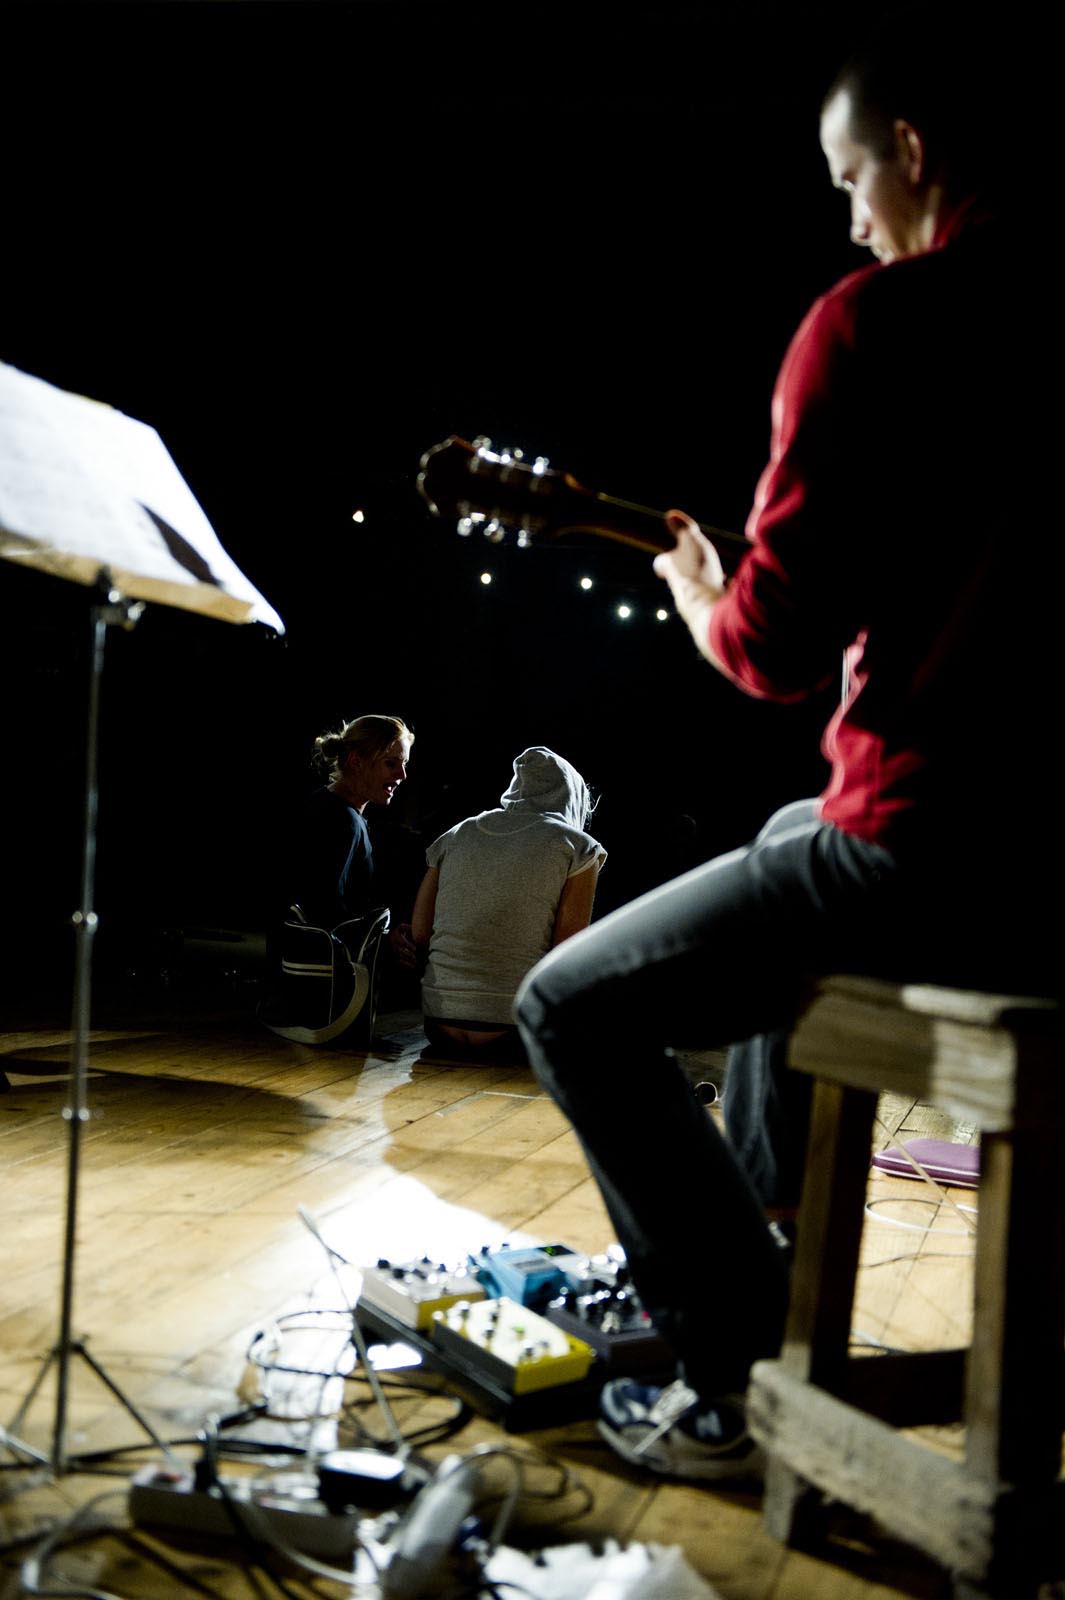 Rasmus Nissen playing guitar during the rehearsals for the Music Theater performance Distillation by Fleurville